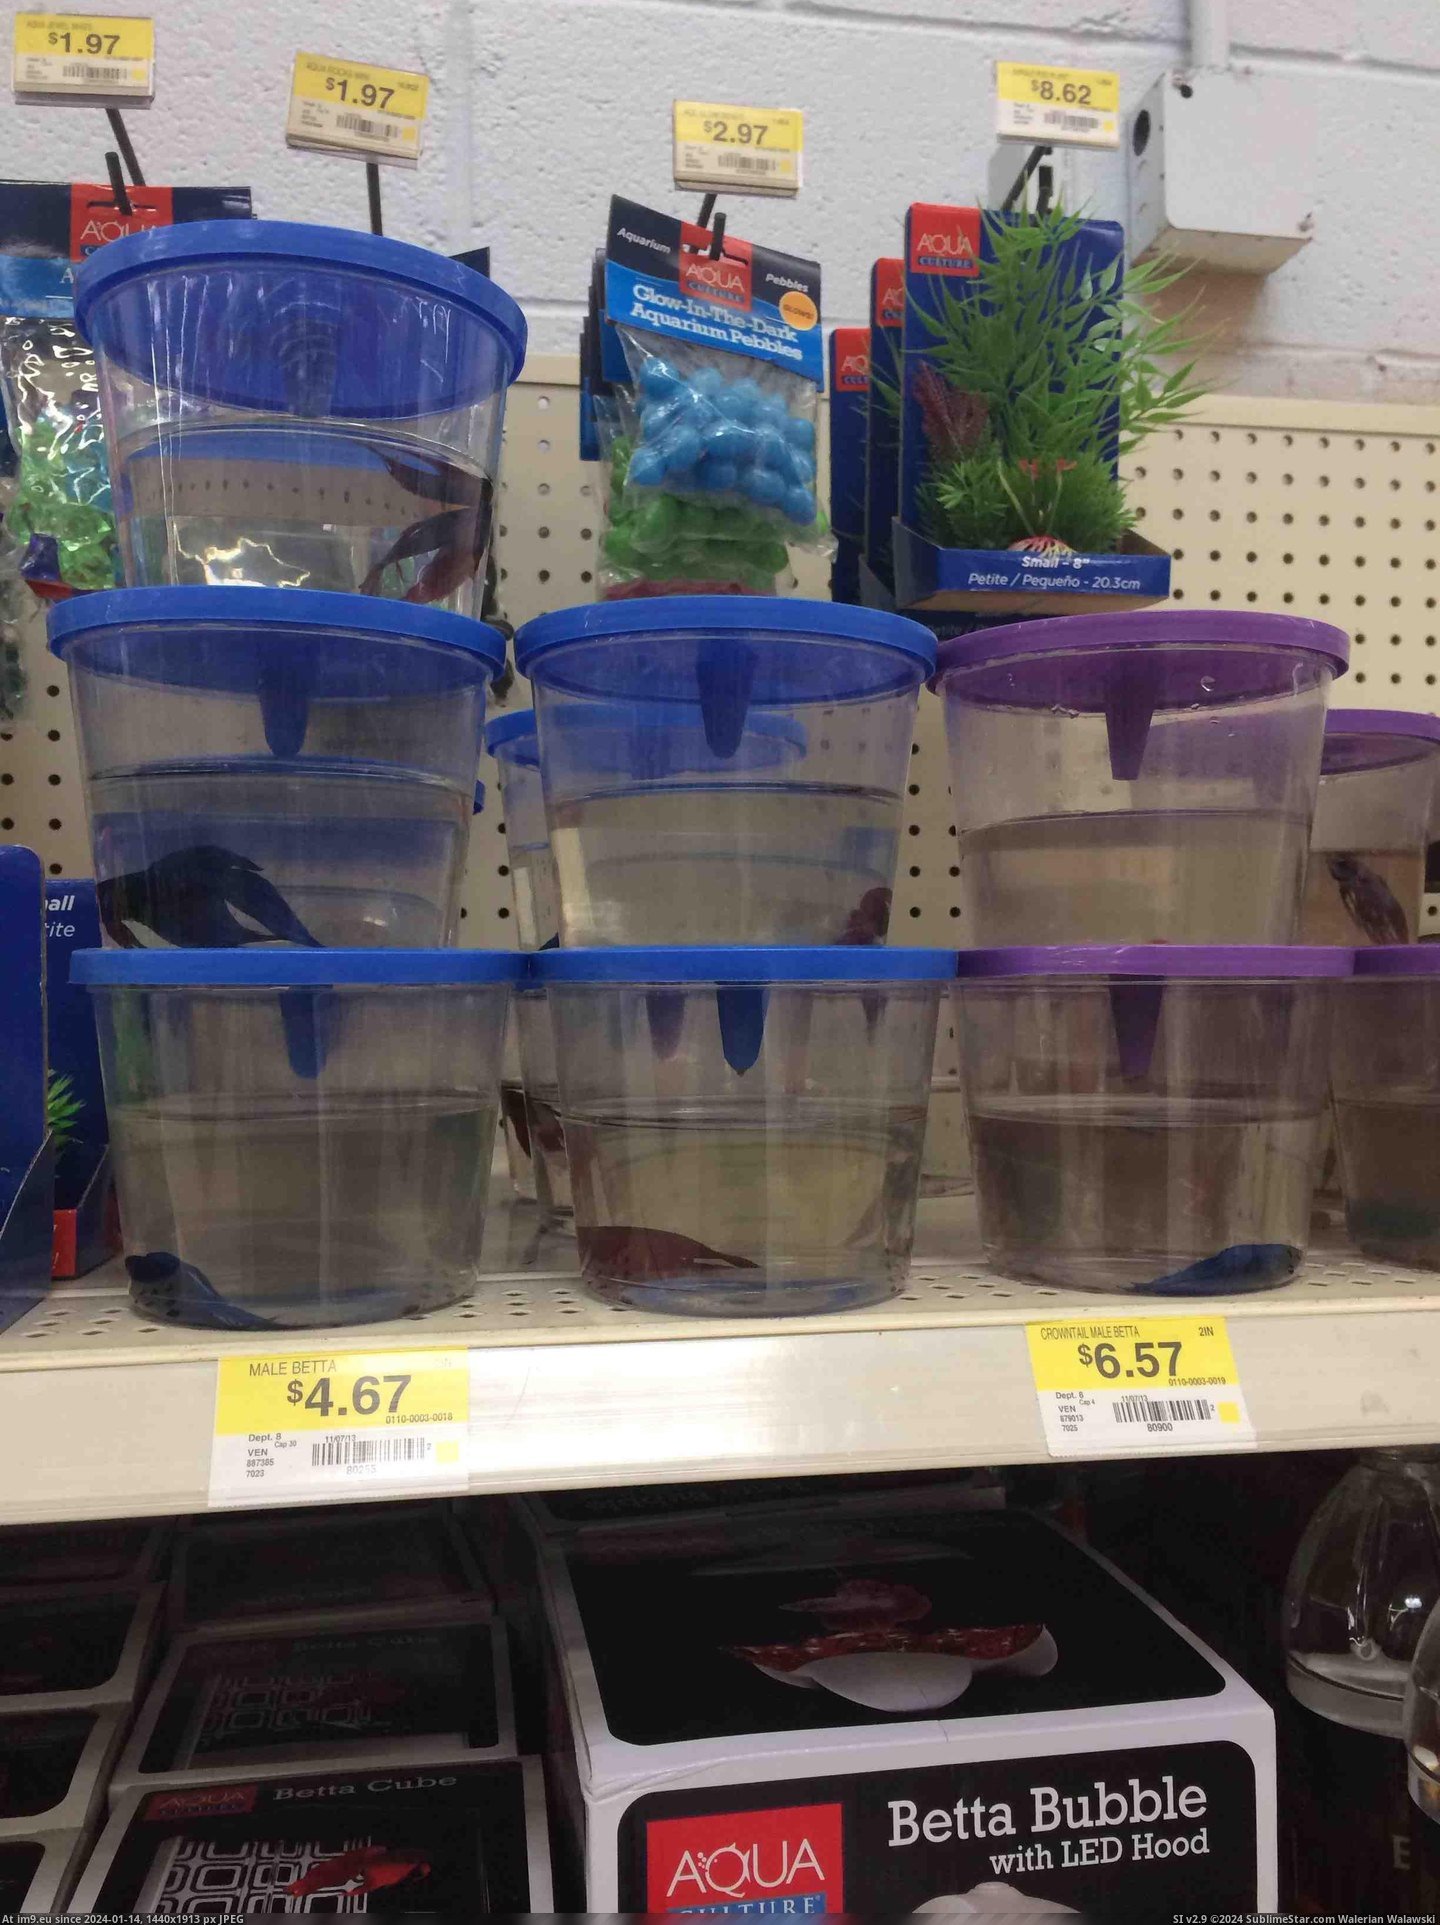 #Wtf #One #You #Why #Alive #Wal #Mart #Was #Good #Too [Wtf] Why do you do this Wal-Mart? There was only one alive, and it didn't look too good. Pic. (Изображение из альбом My r/WTF favs))